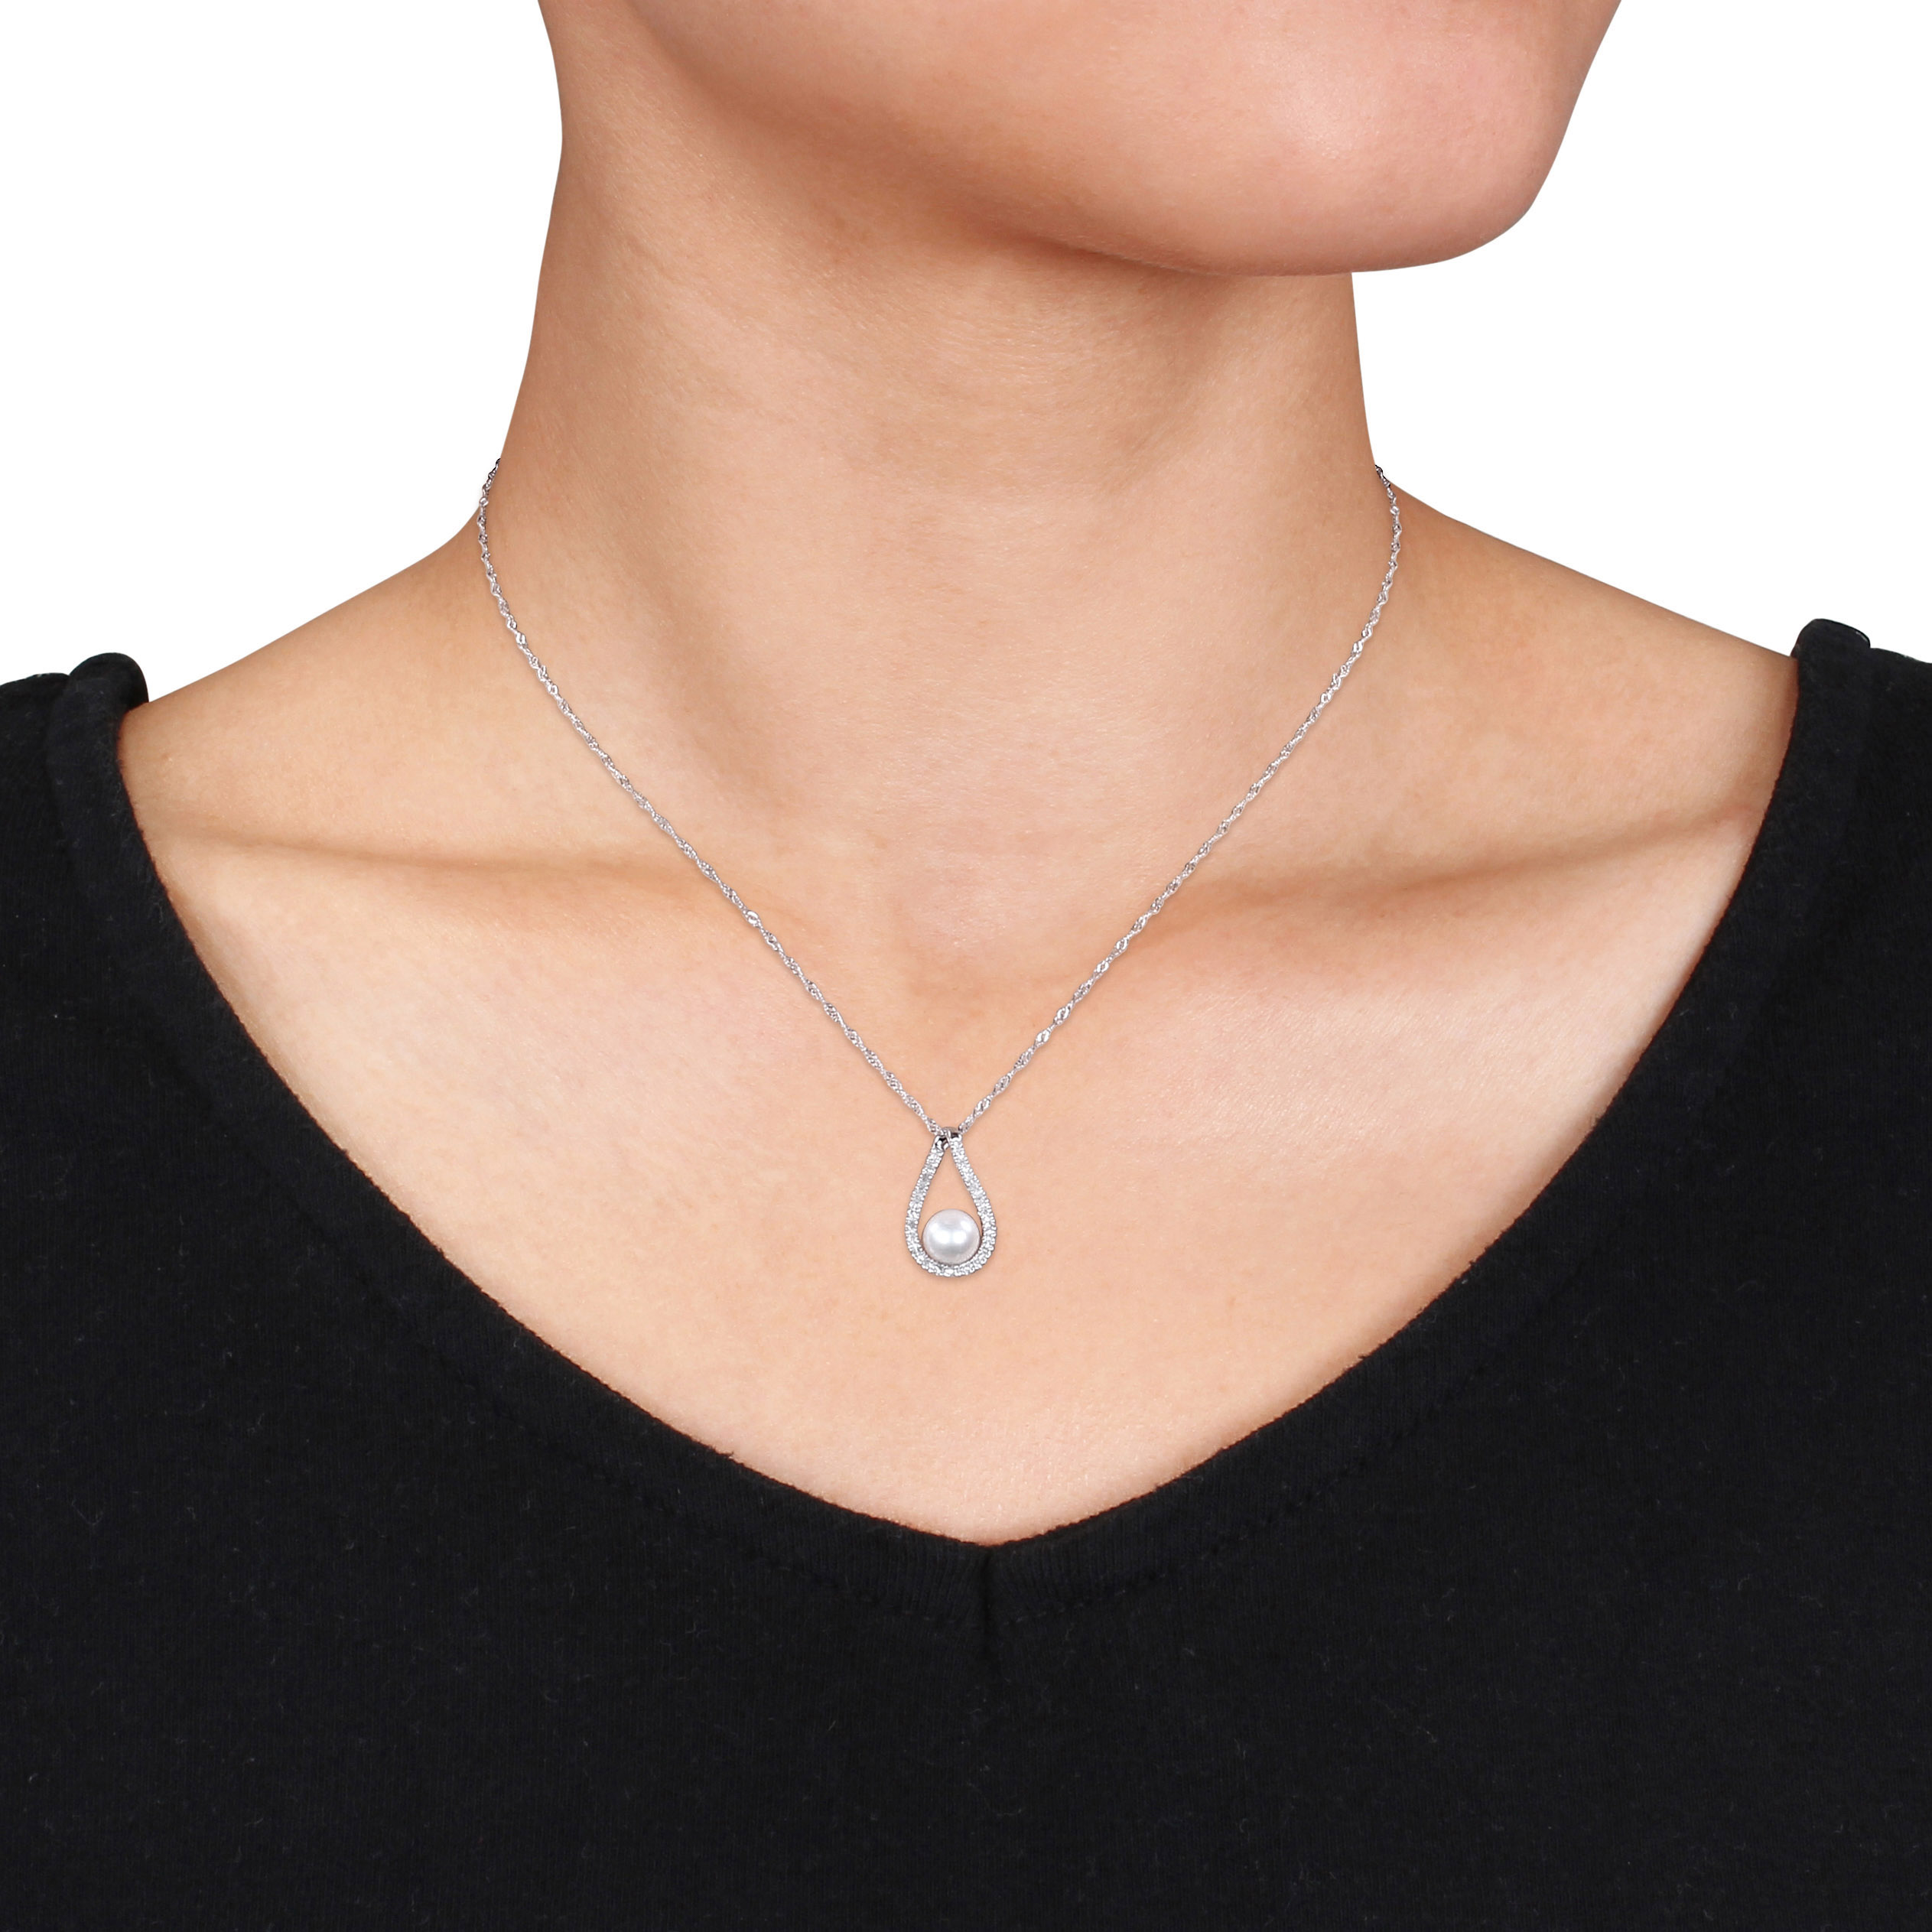 6.5 - 7 MM Cultured Freshwater Pearl and 1/10 CT TW Diamond Raindrop Pendant with Chain in 14k White Gold